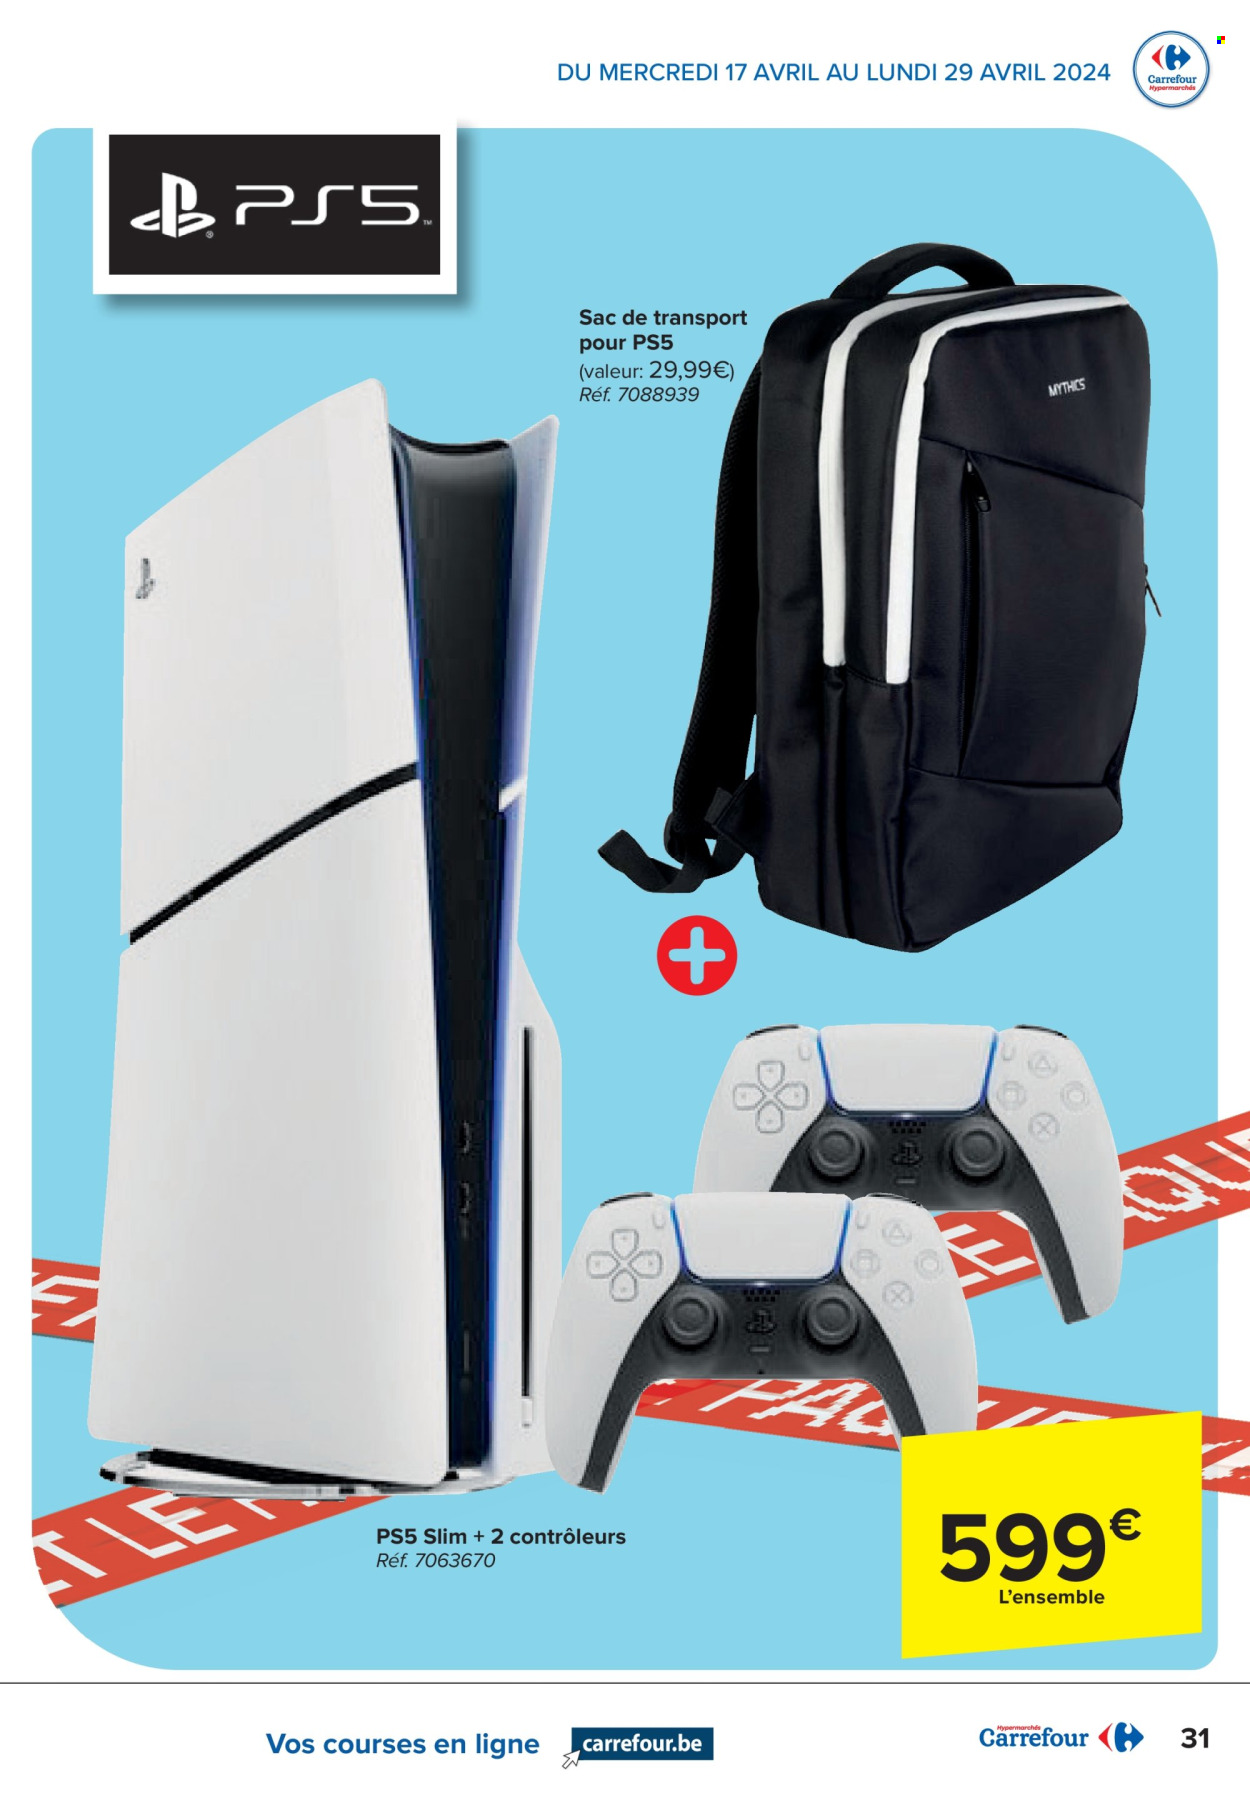 Catalogue Carrefour hypermarkt - 17.4.2024 - 29.4.2024. Page 31.